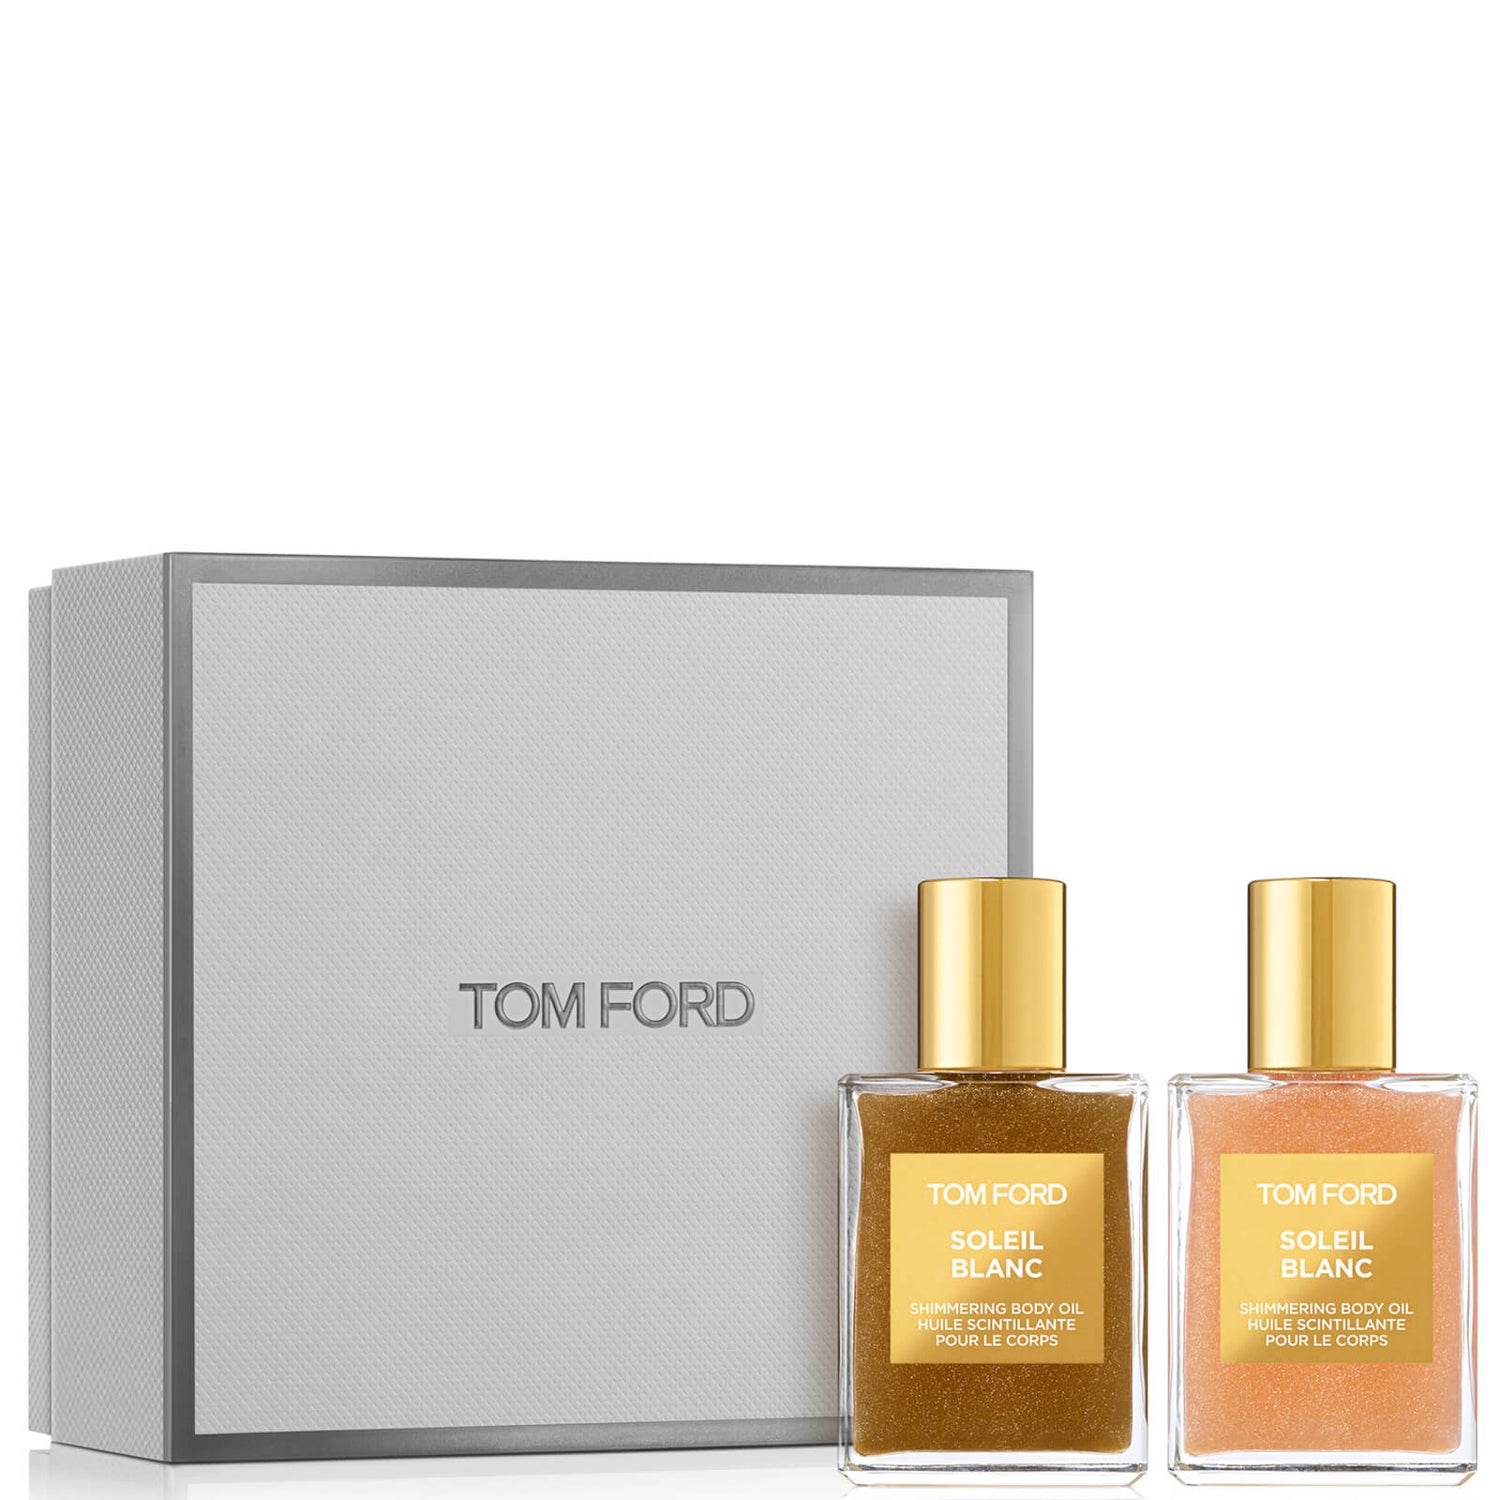 Tom Ford Exclusive Soleil Blanc Shimmer Body Oil Duo - LOOKFANTASTIC